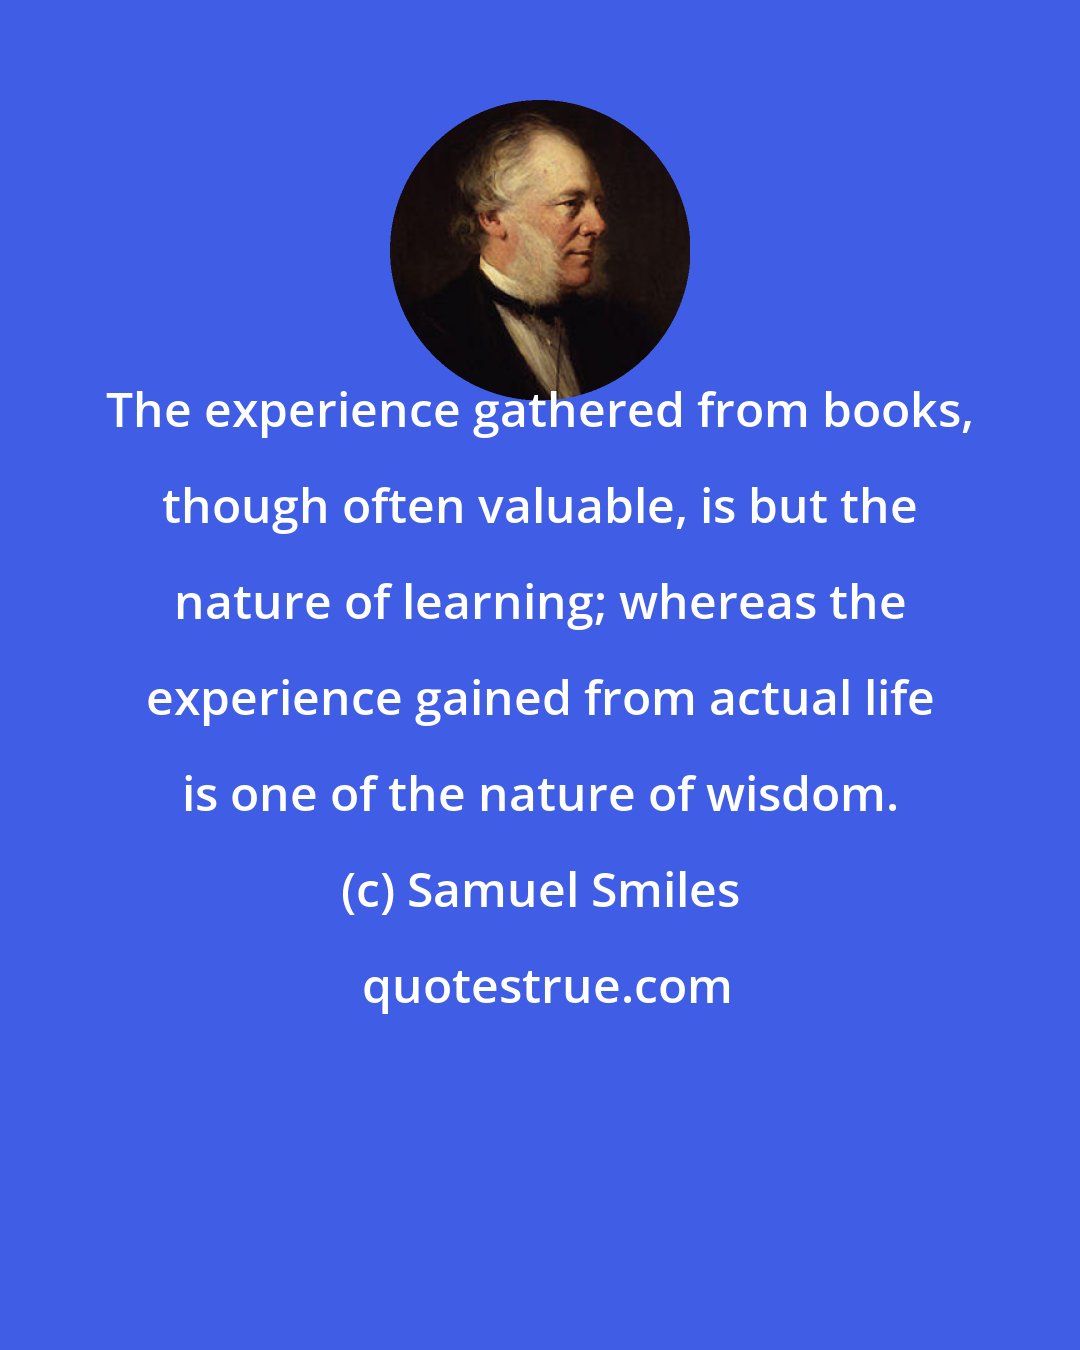 Samuel Smiles: The experience gathered from books, though often valuable, is but the nature of learning; whereas the experience gained from actual life is one of the nature of wisdom.